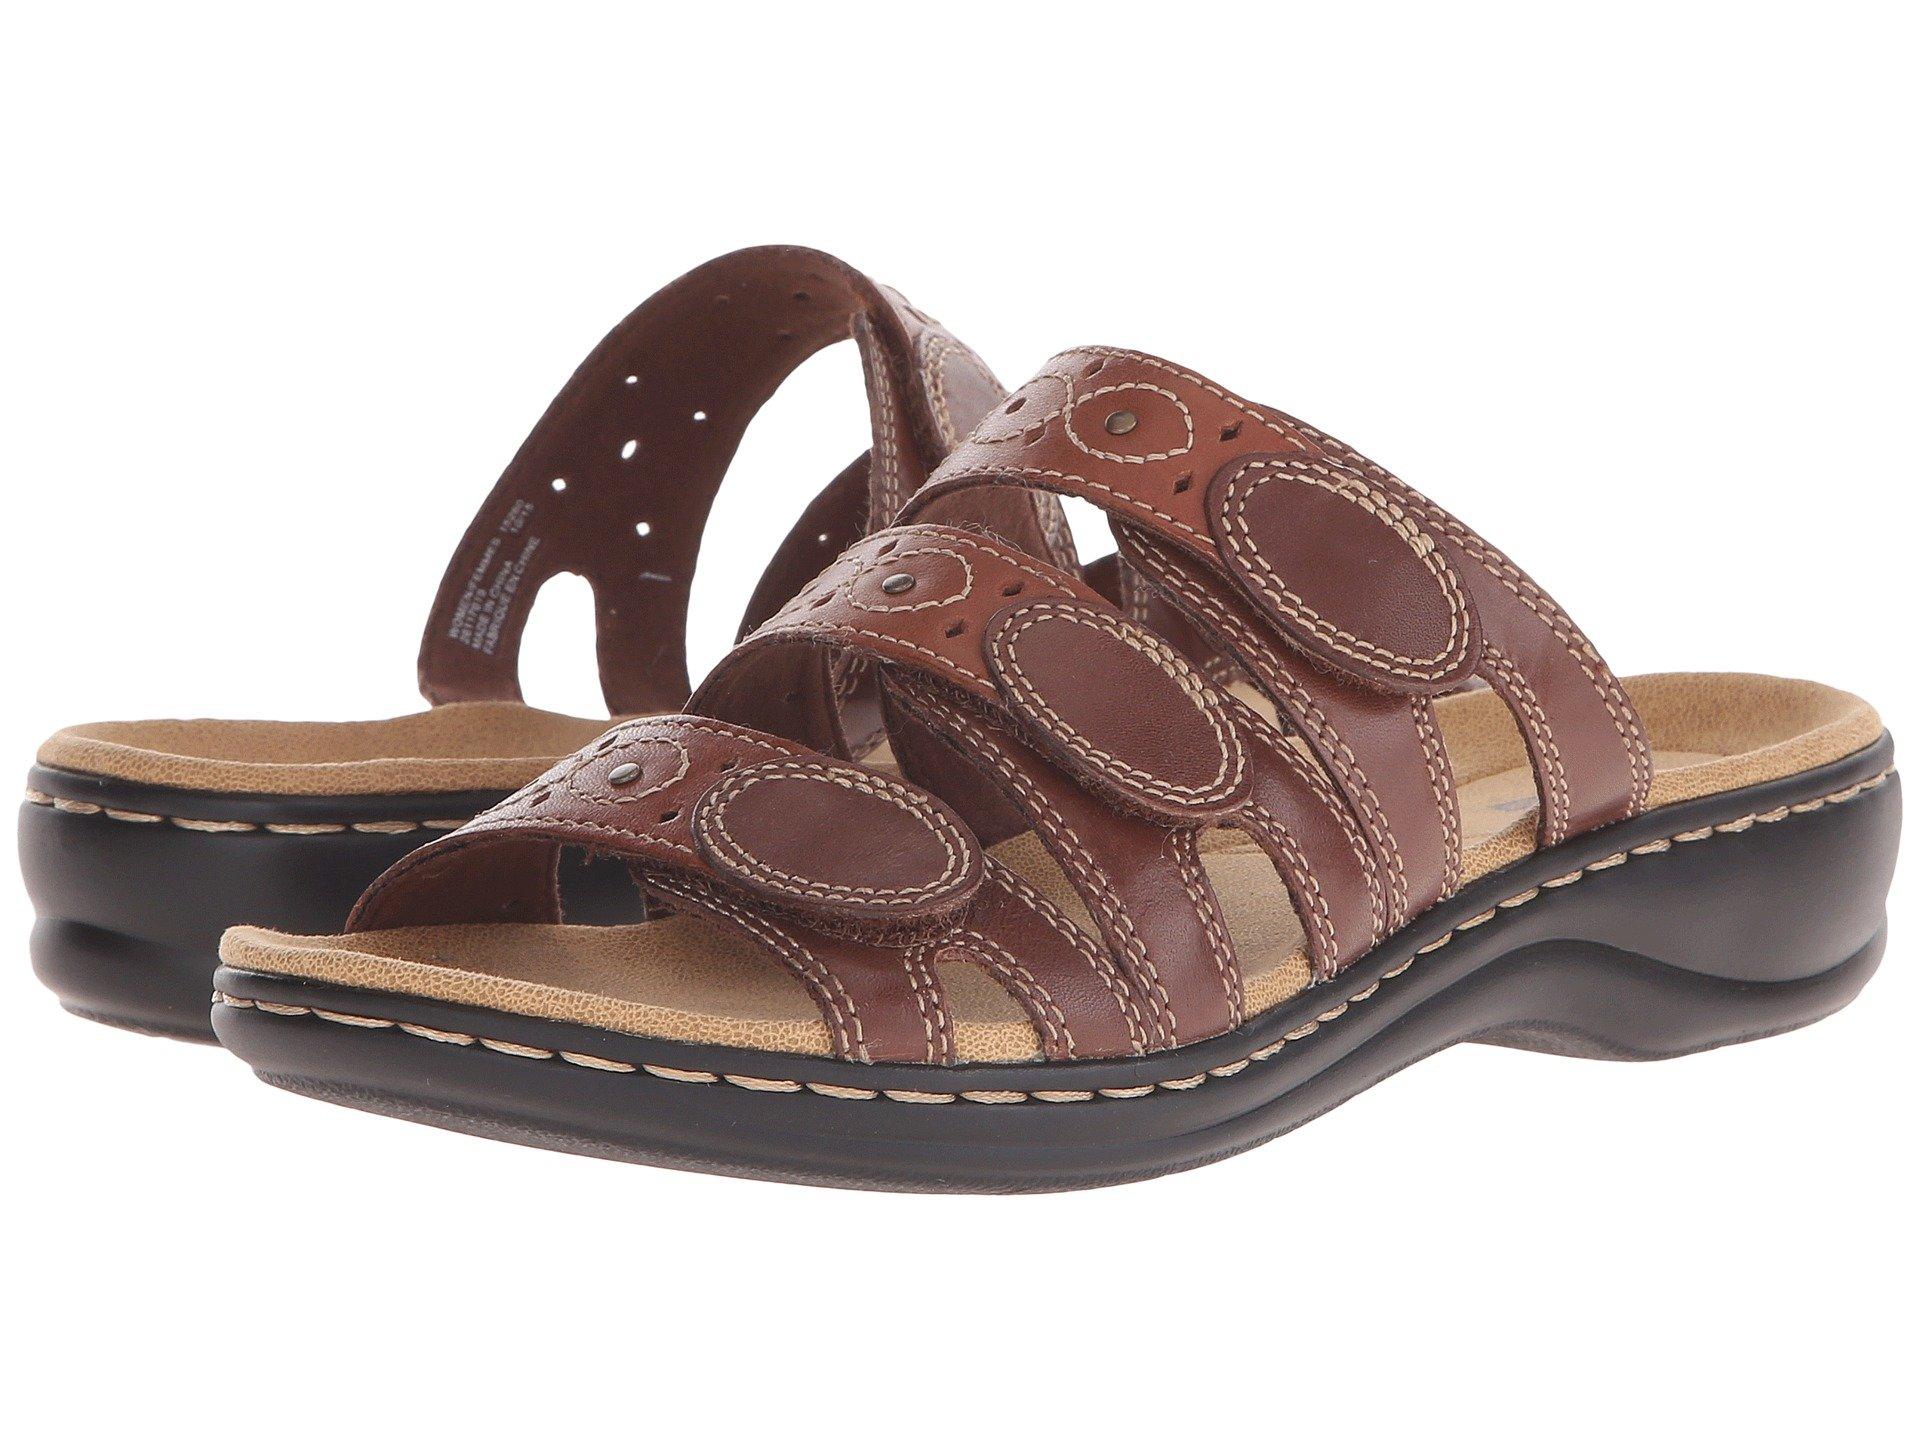 Clarks Leisa Cacti Q Flat Sandals in Brown - Save 35% - Lyst